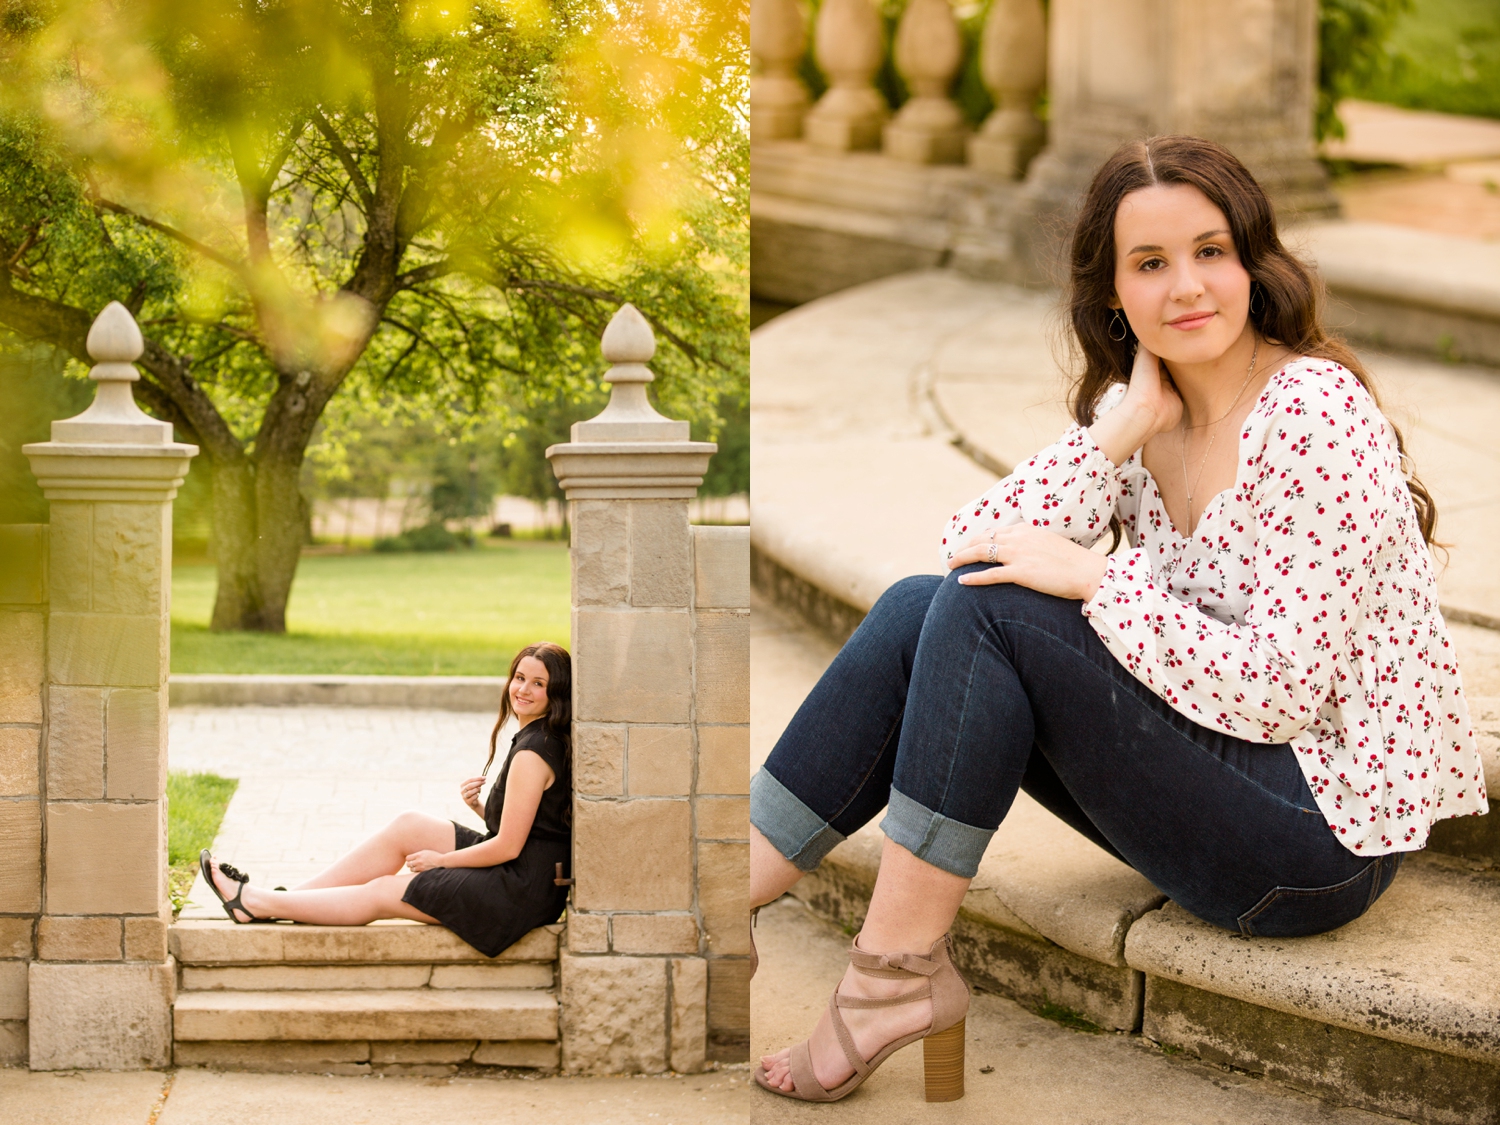 pittsburgh senior photos, pittsburgh senior photographer, location for photoshoot pittsburgh, hartwood acres mansion senior photos